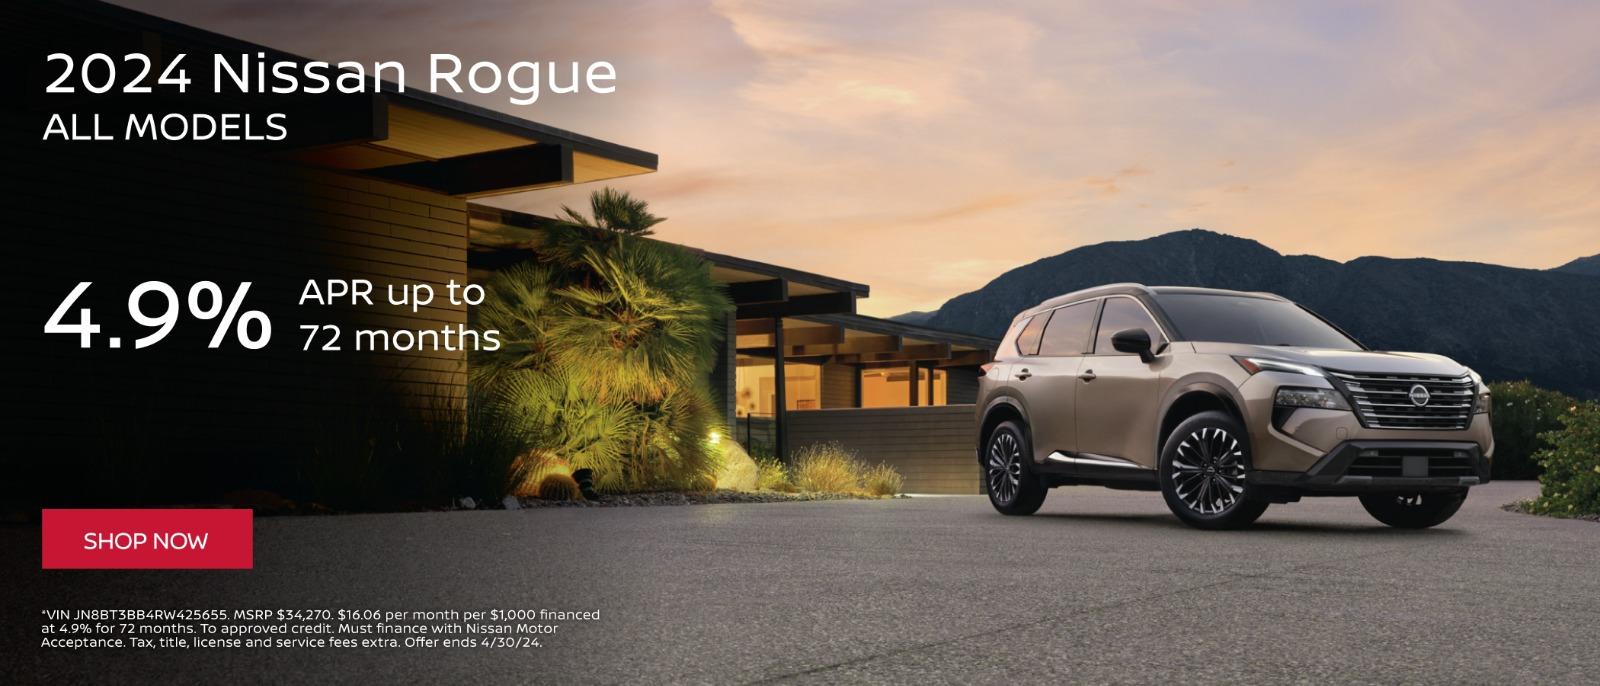 2024 Nissan Rogue 4.9% Apr up to 72 Months